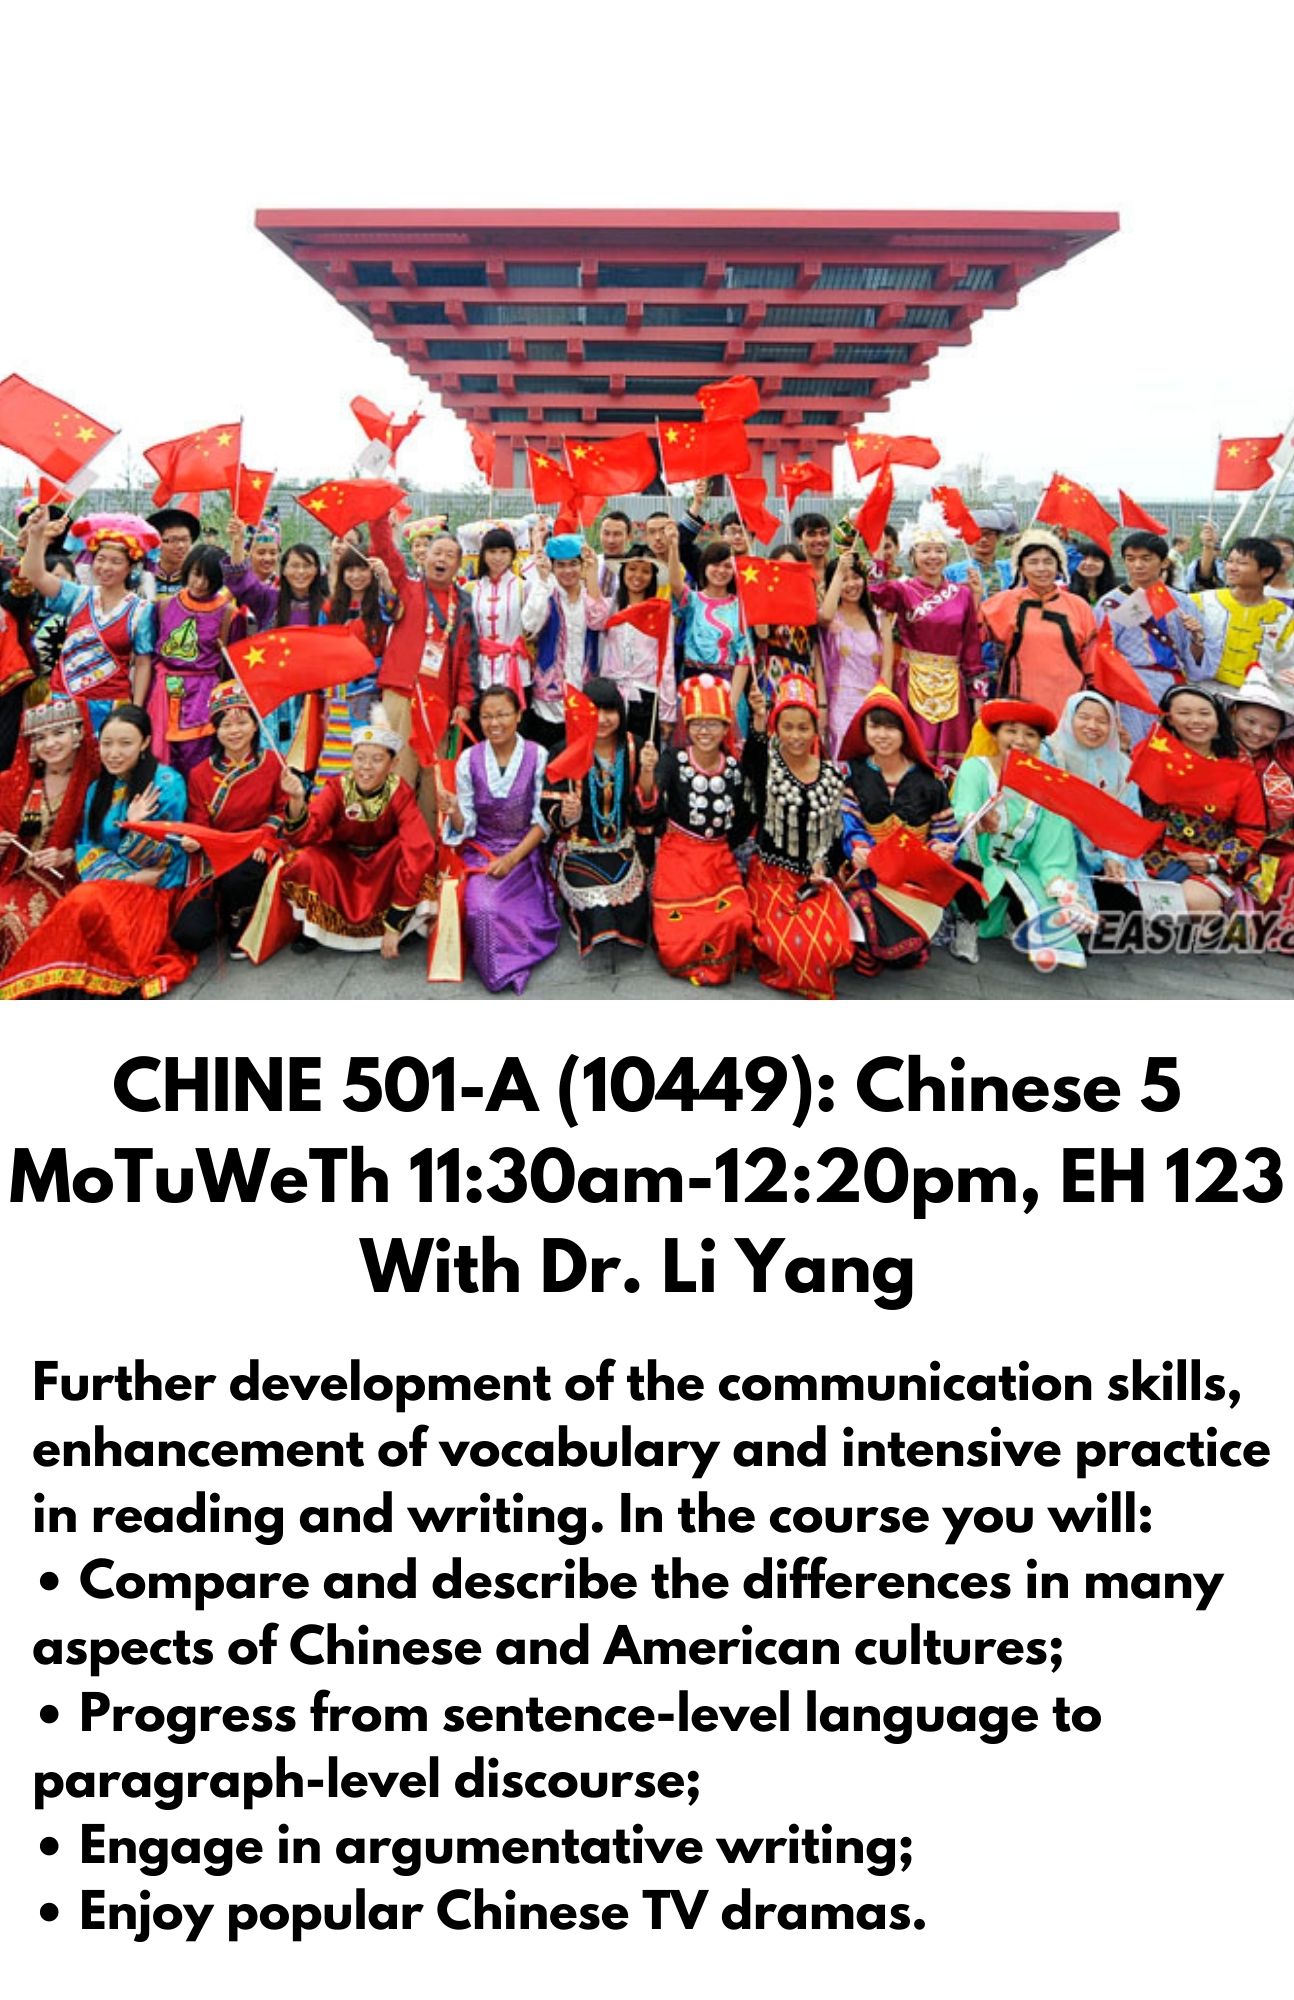 CHINE 501-A (10449): Chinese 5 MoTuWeTh 11:30am-12:20pm, EH 123 With Dr. Li Yang.Further development of the communication skills, enhancement of vocabulary and intensive practice in reading and writing. In the course you will: • Compare and describe the differences in many aspects of Chinese and American cultures; • Progress from sentence-level language to paragraph-level discourse;  • Engage in argumentative writing;  • Enjoy popular Chinese TV dramas.